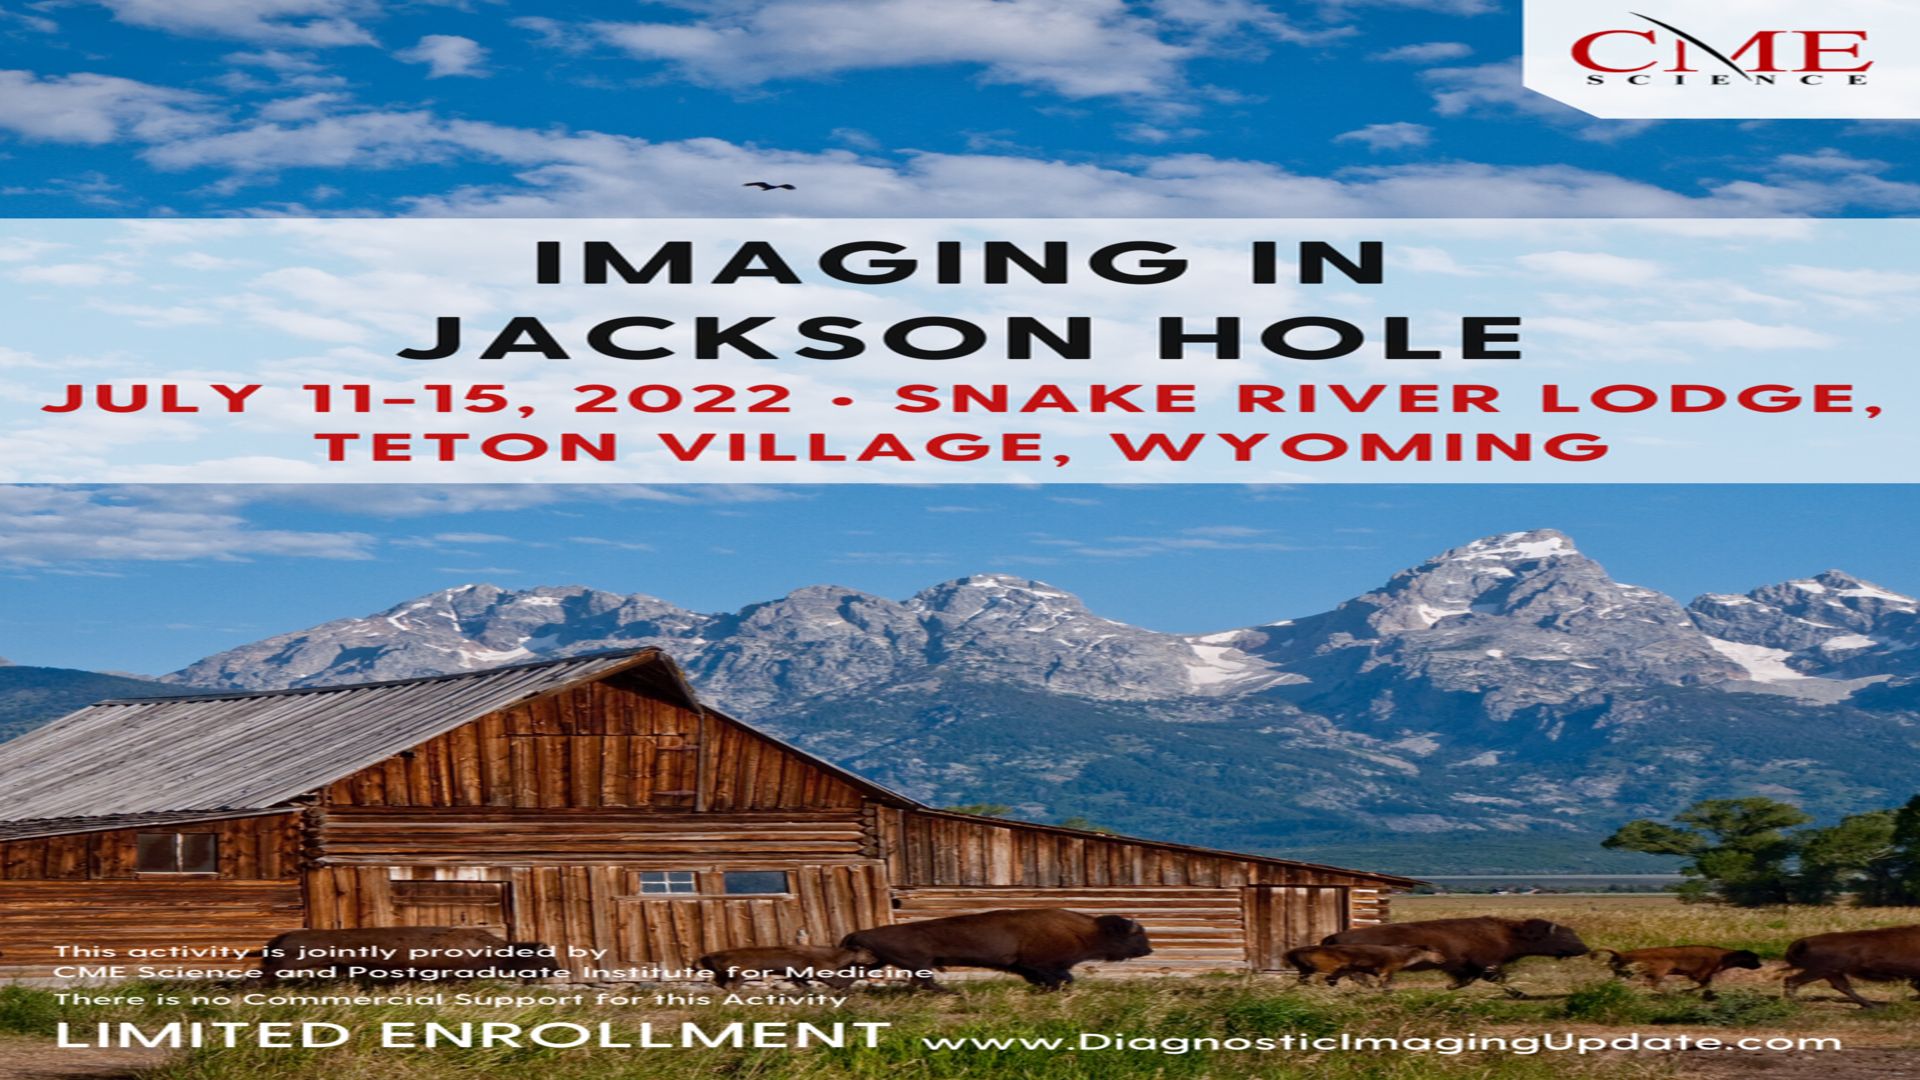 Imaging in Jackson Hole - July 11-15, 2022